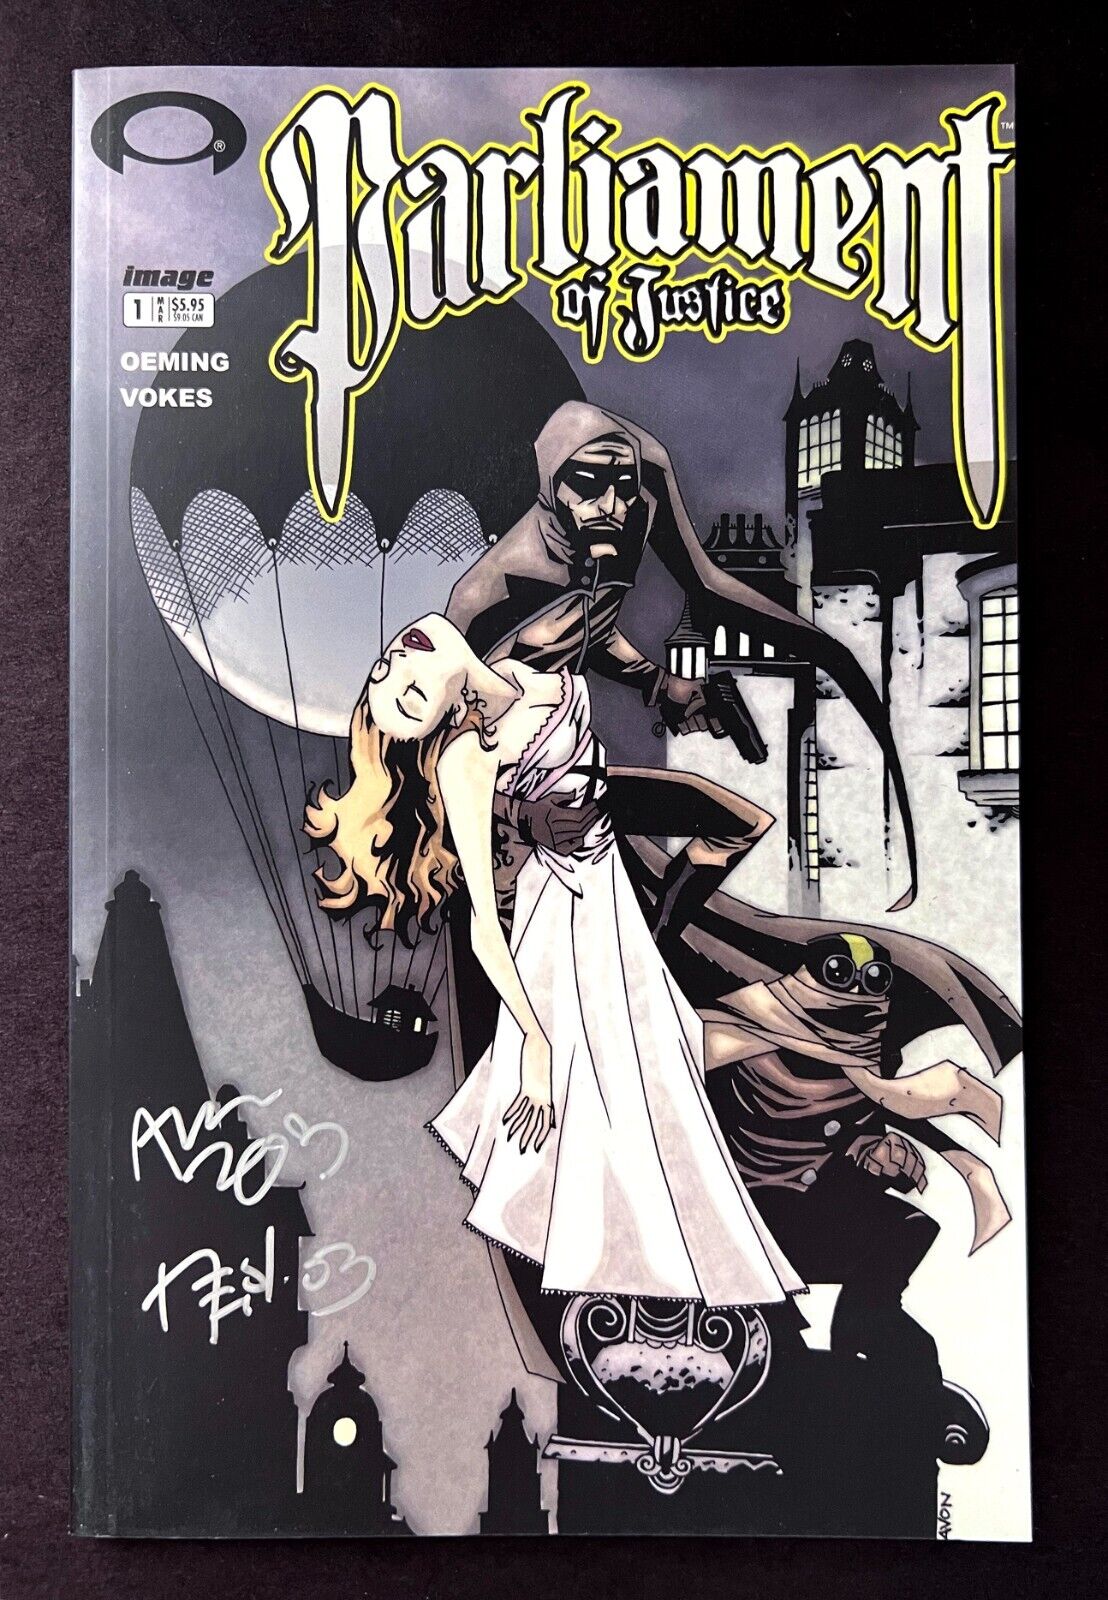 PARLIAMENT OF JUSTICE #1 Signed By Neil Vokes & Michael Avon Oeming Image 2003